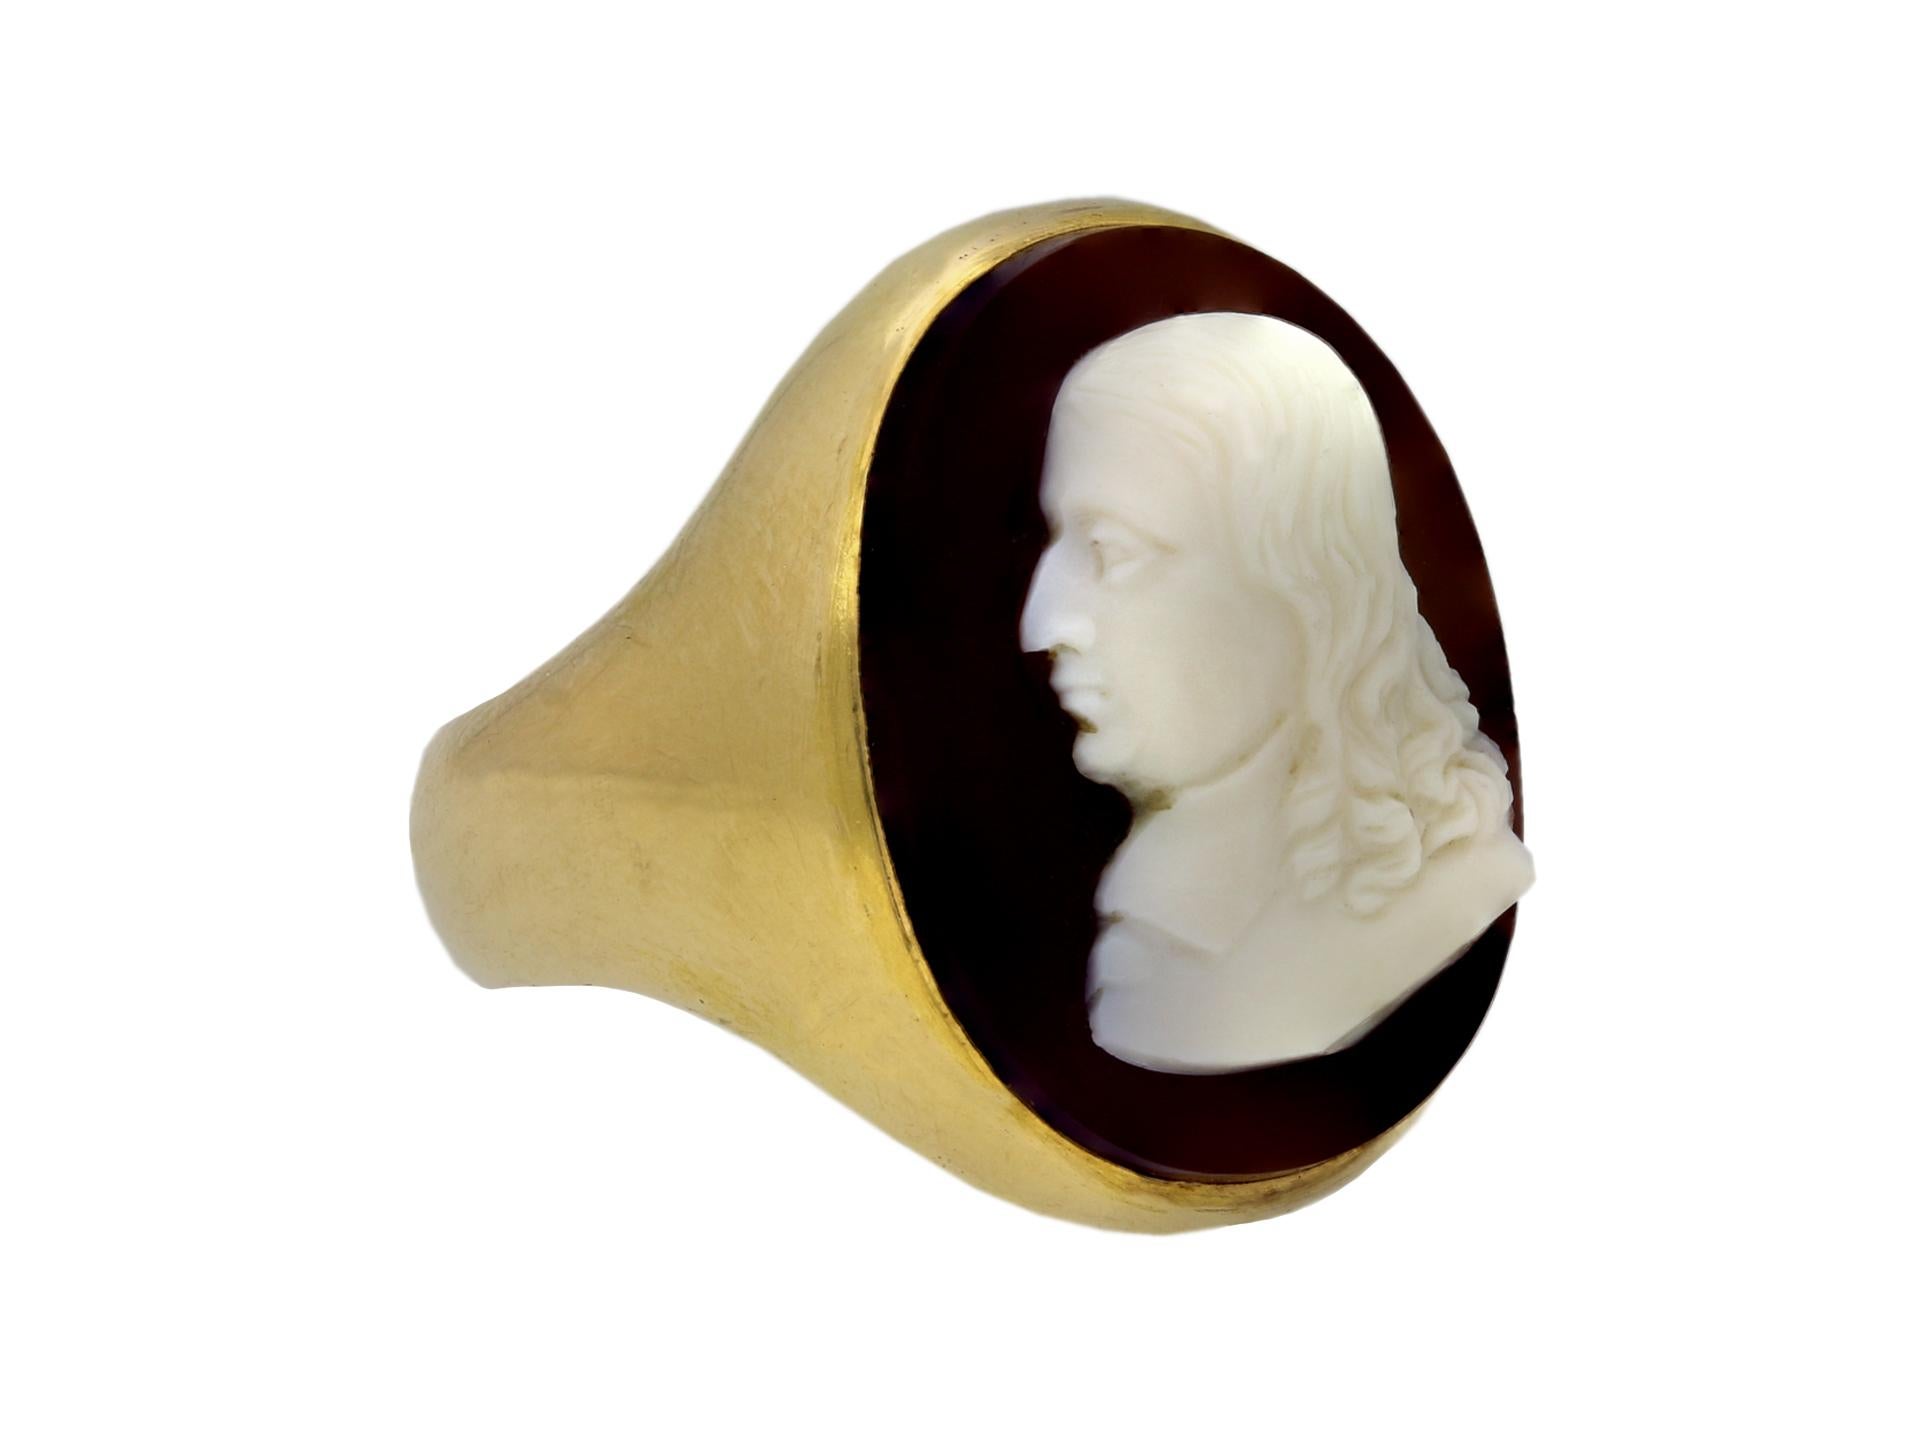 Stuart sardonyx cameo of John Milton mounted in a Victorian gold ring. Set with an oval sardonyx 17th century cameo in a rubover setting featuring a profile bust of John Milton (1608-74), the eminent seventeenth century English poet, leading to